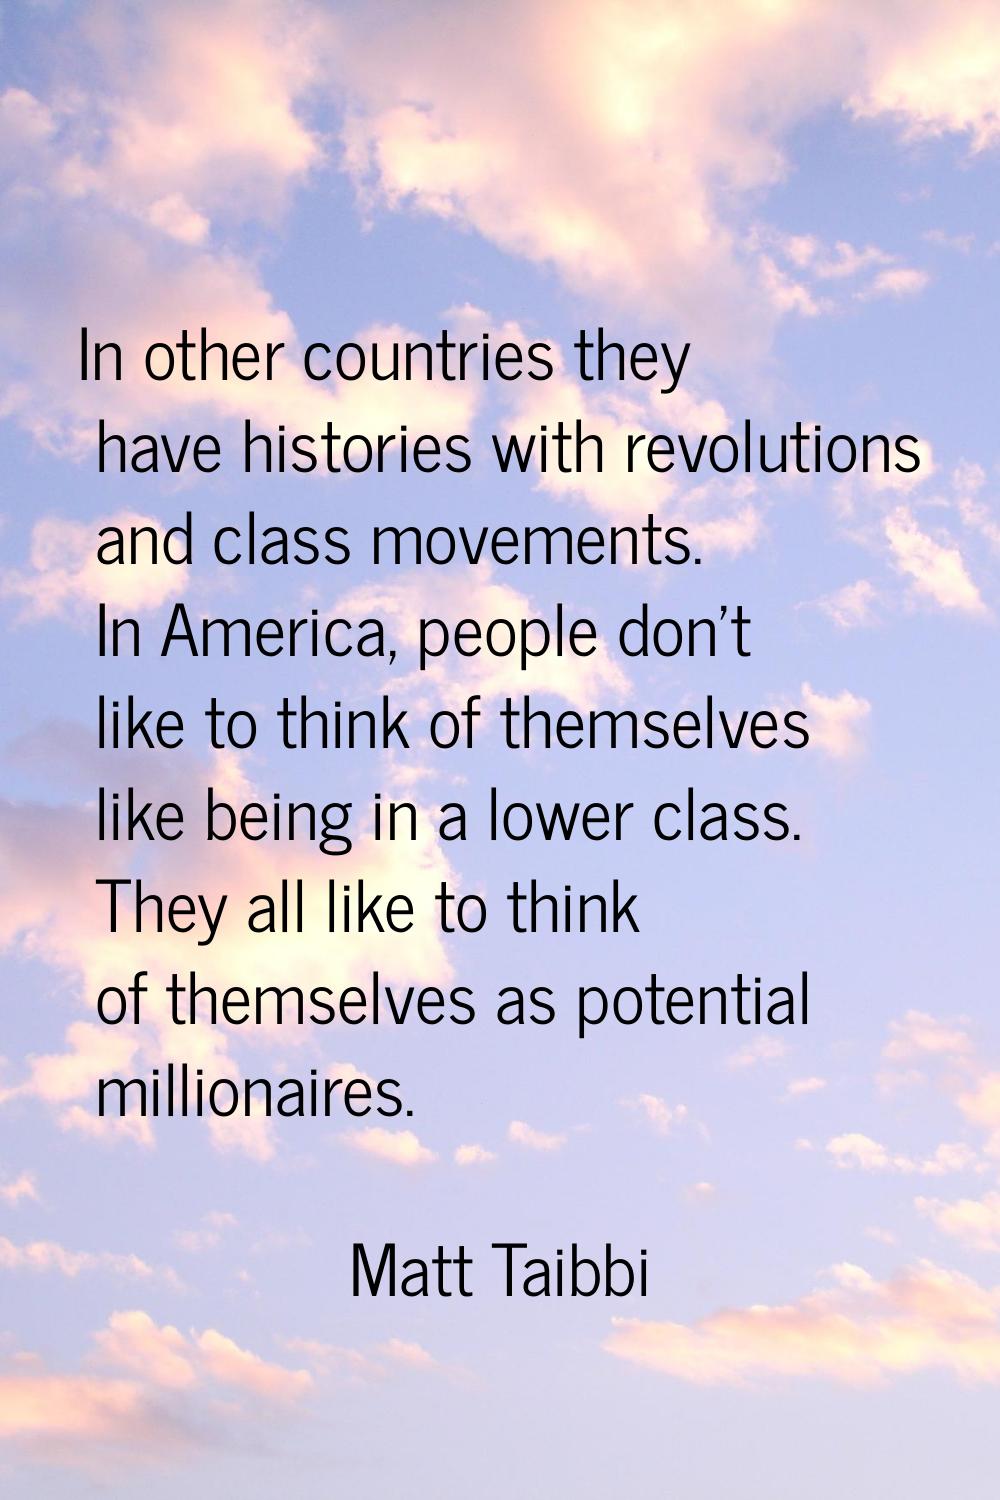 In other countries they have histories with revolutions and class movements. In America, people don